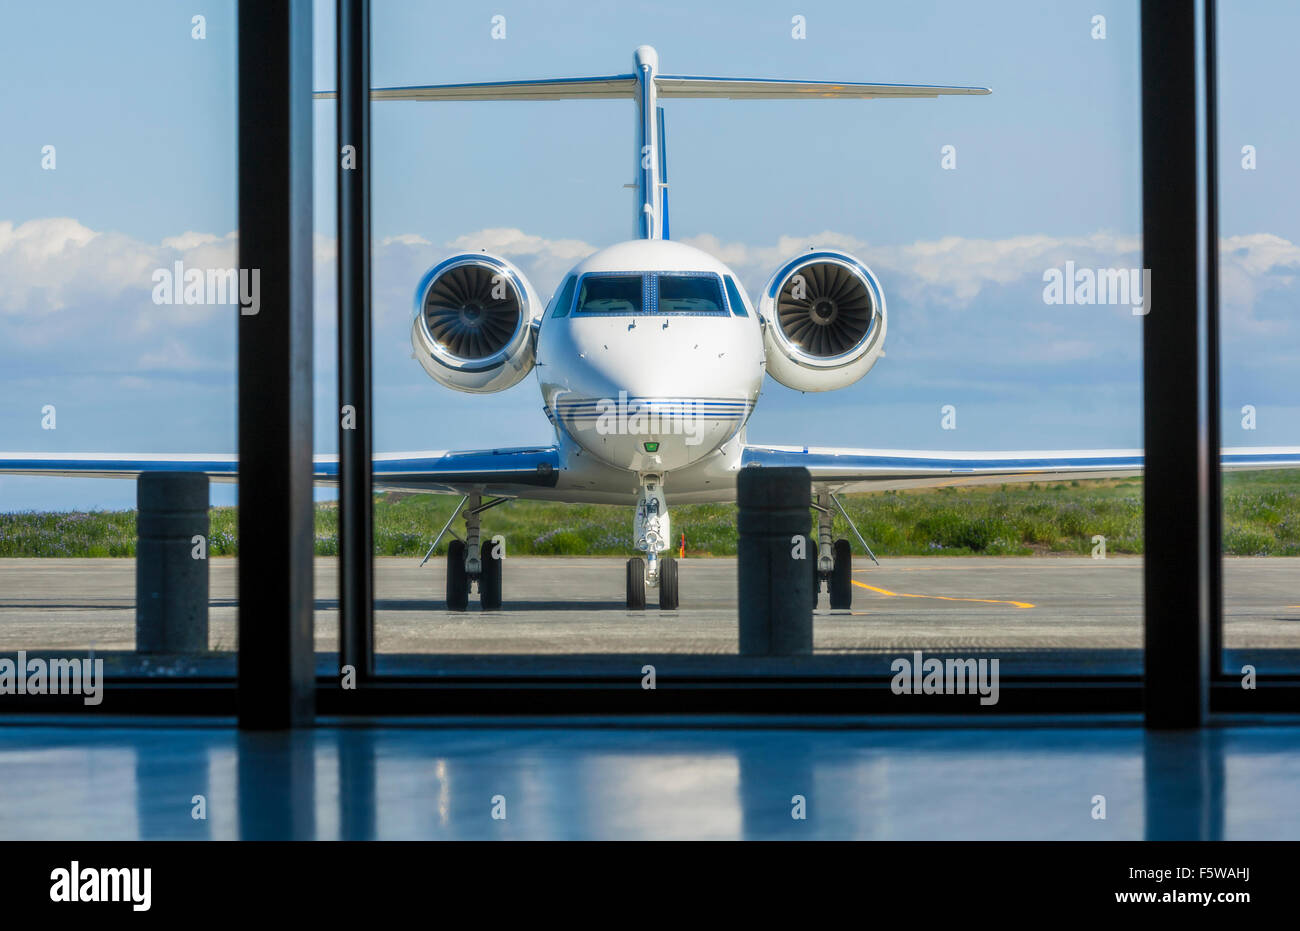 Private corporate jet airplane or aeroplane parked at an airport Stock Photo